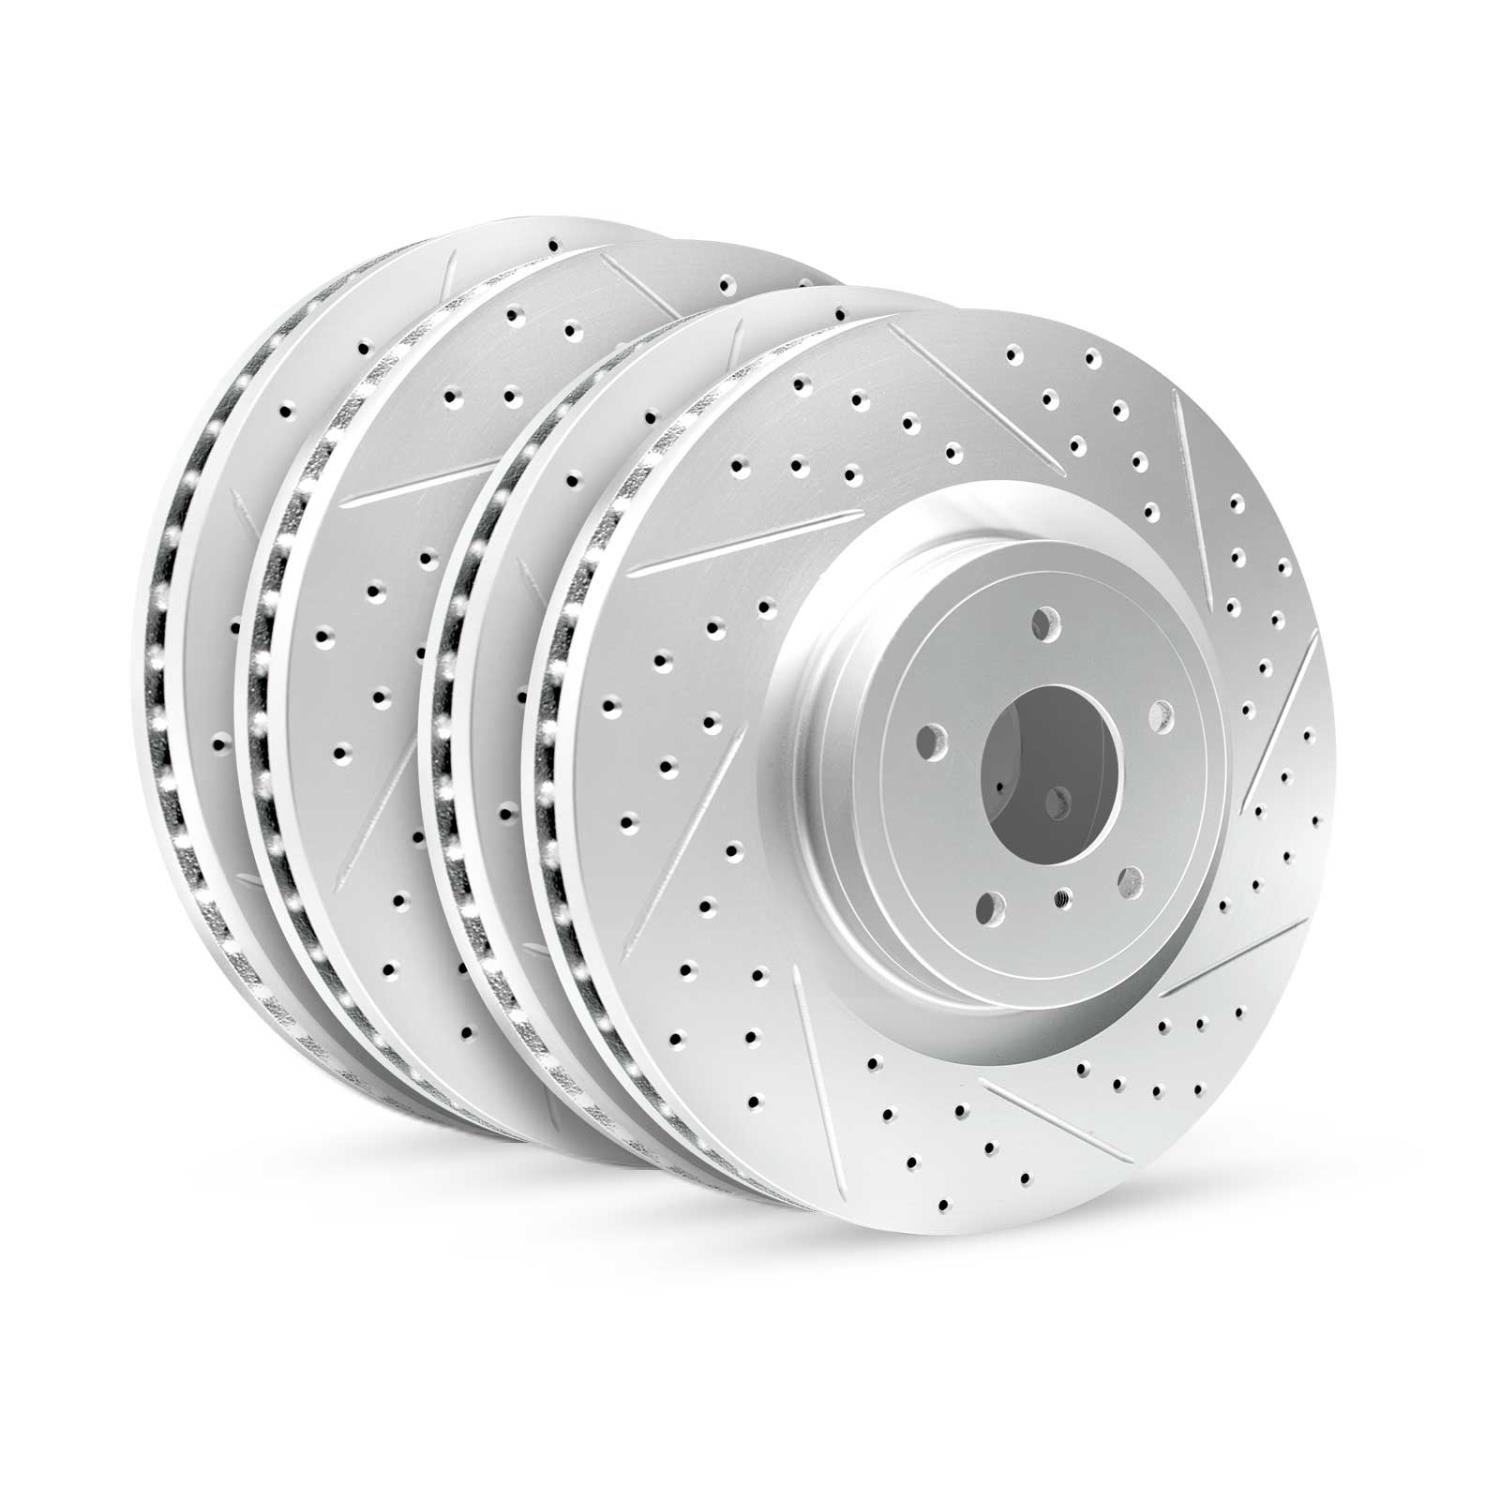 GEO-Carbon Drilled & Slotted Brake Rotor & Drum Set, 2012-2014 Lexus/Toyota/Scion, Position: Front & Rear